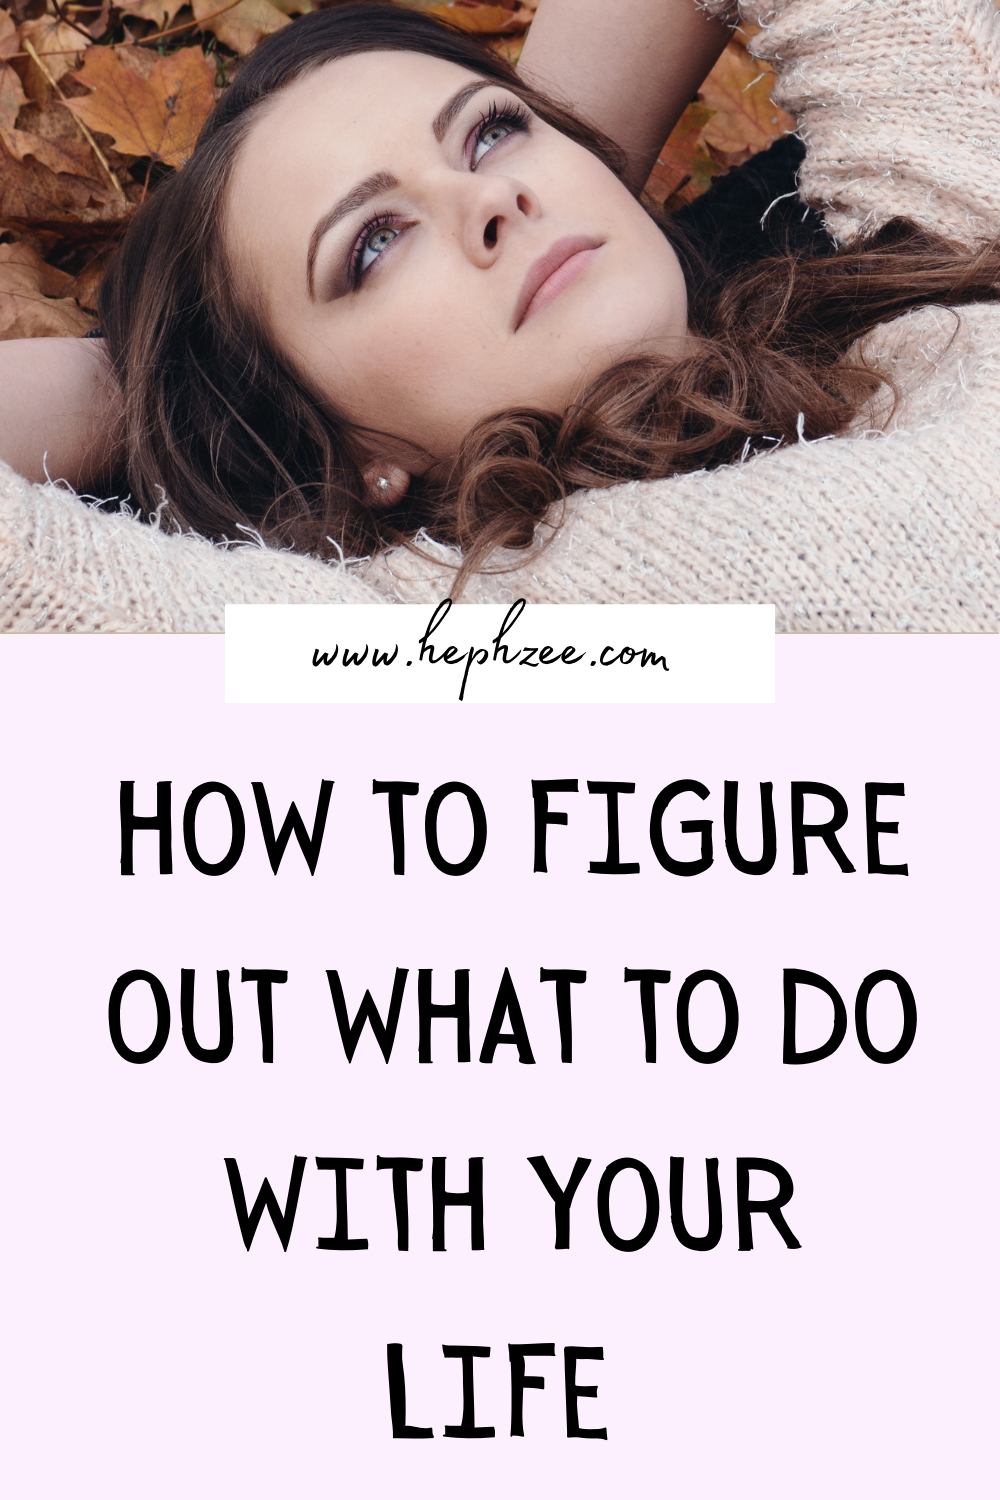 How to figure out what to do with your life